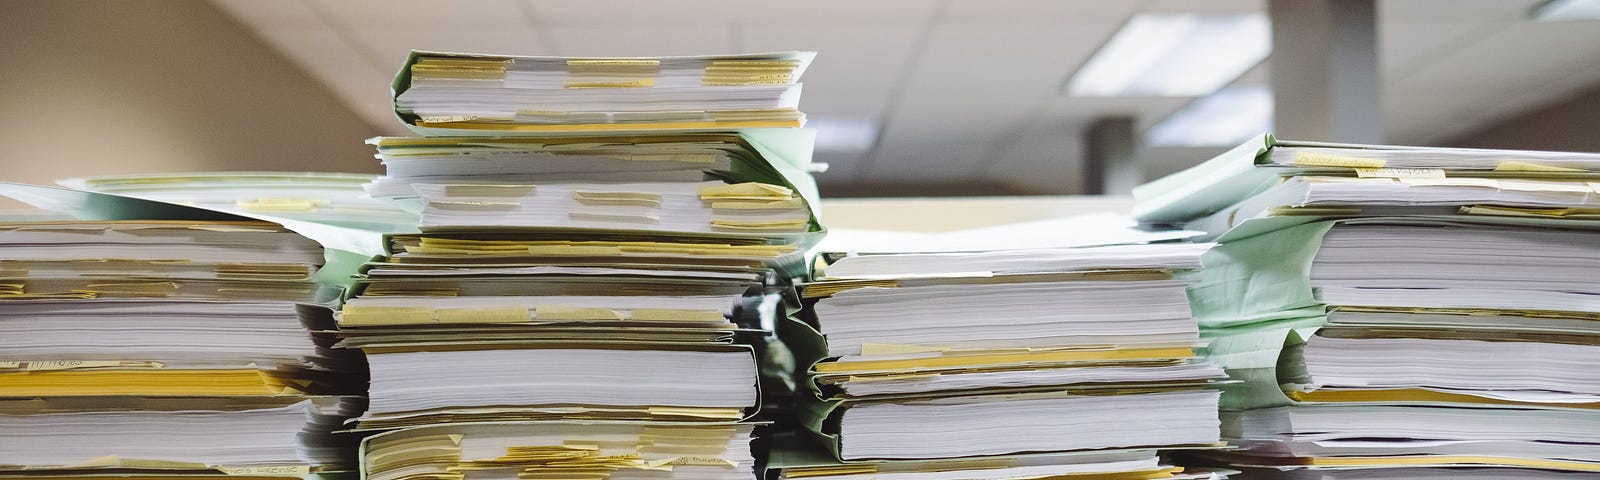 Image of stacks of files